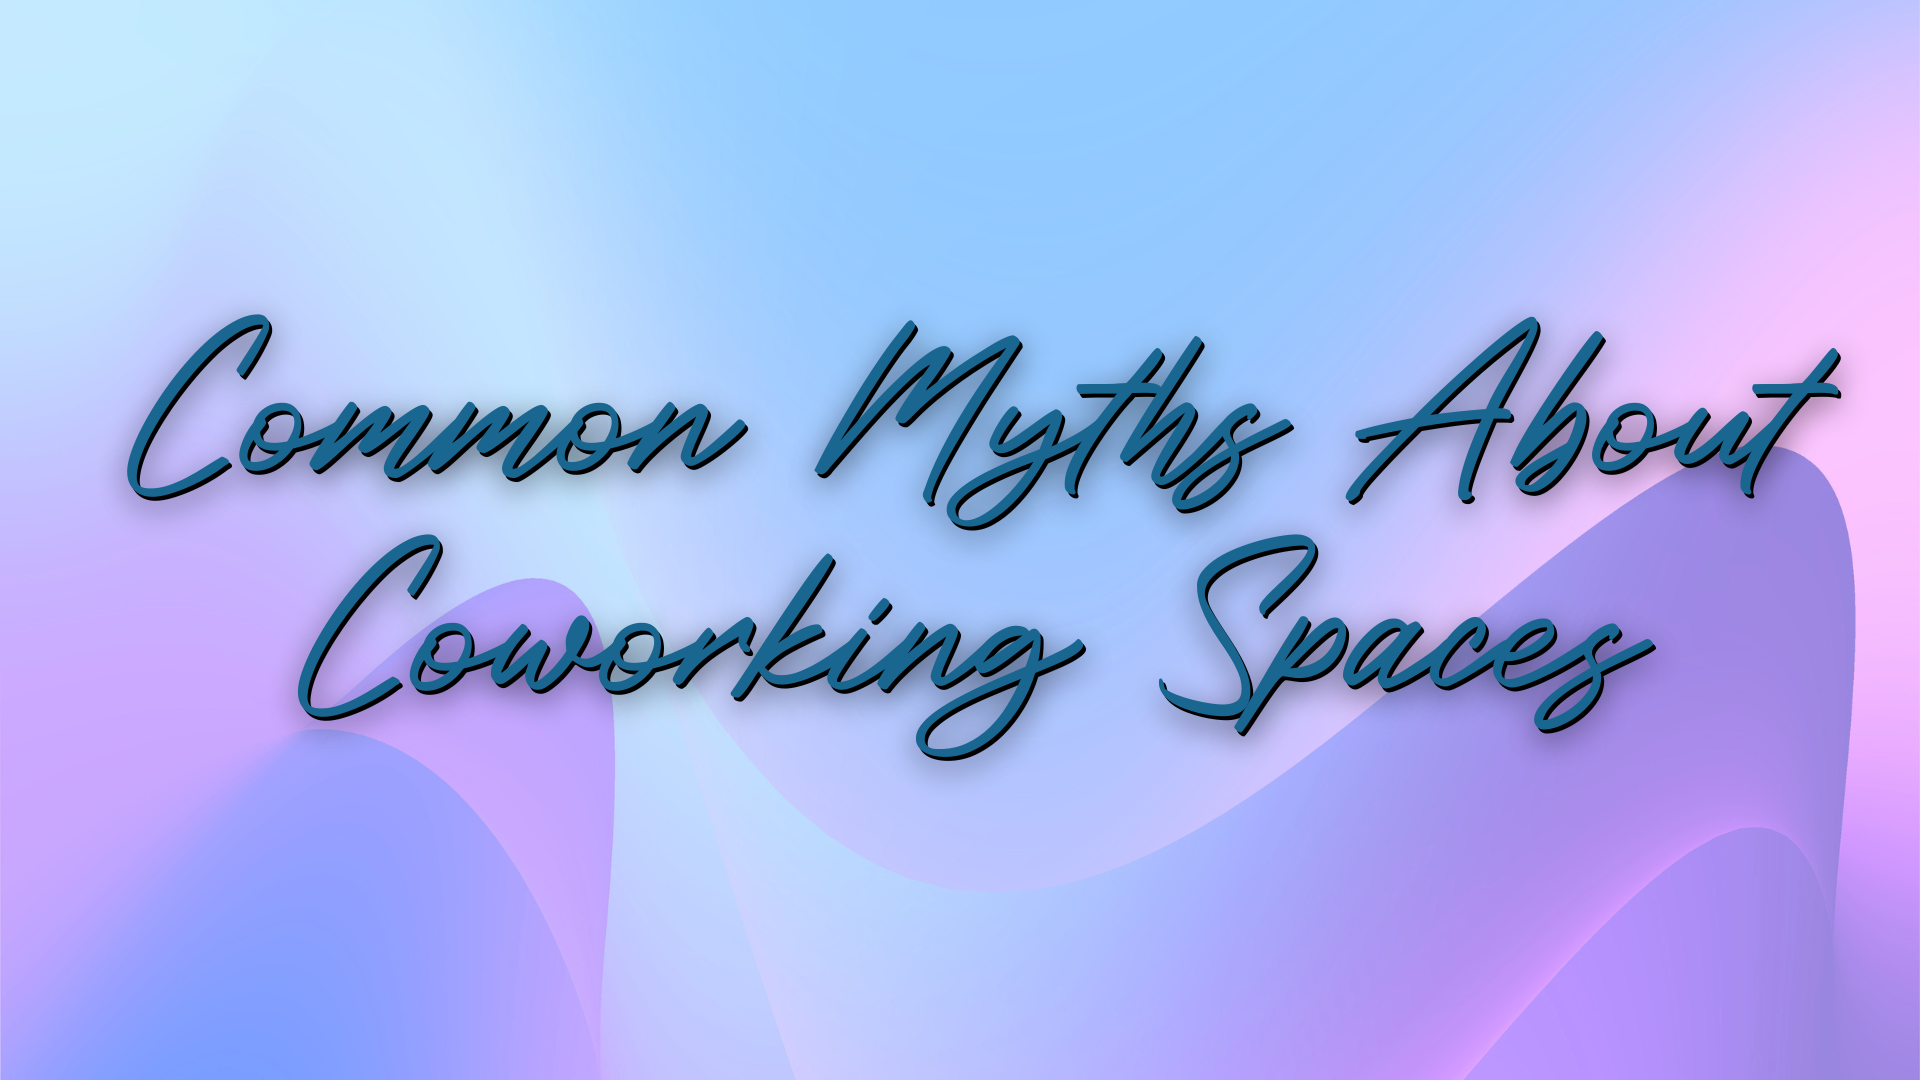 Common Myths about Coworking Spaces